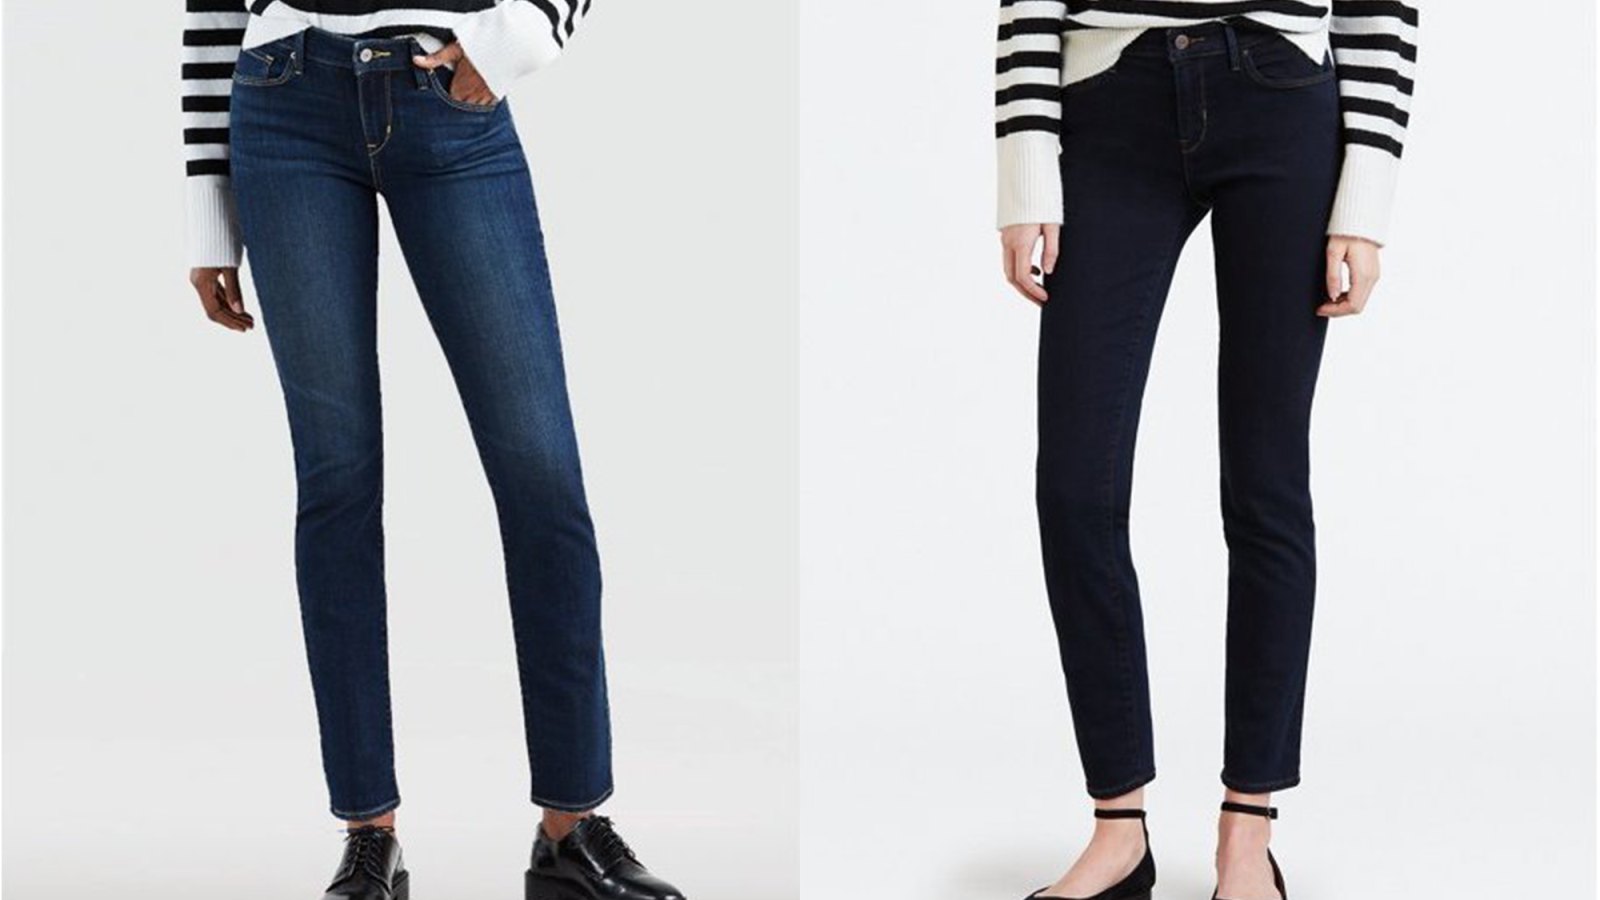 Levi's Skinny Jeans Are 65% Off at Walmart — Limited Time Only